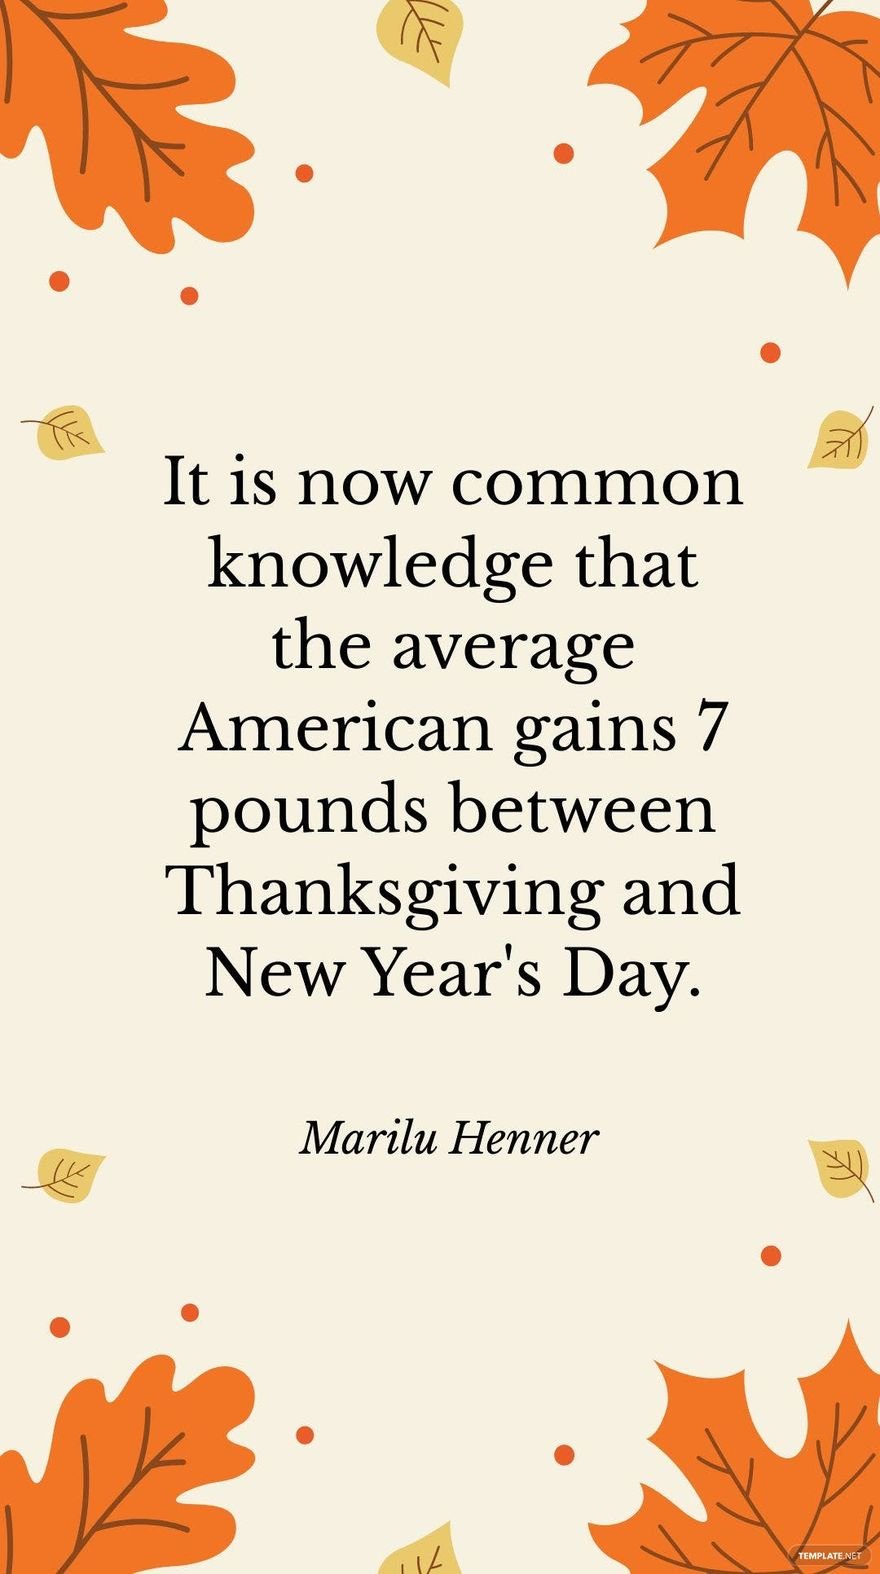 Marilu Henner - It is now common knowledge that the average American gains 7 pounds between Thanksgiving and New Year's Day.